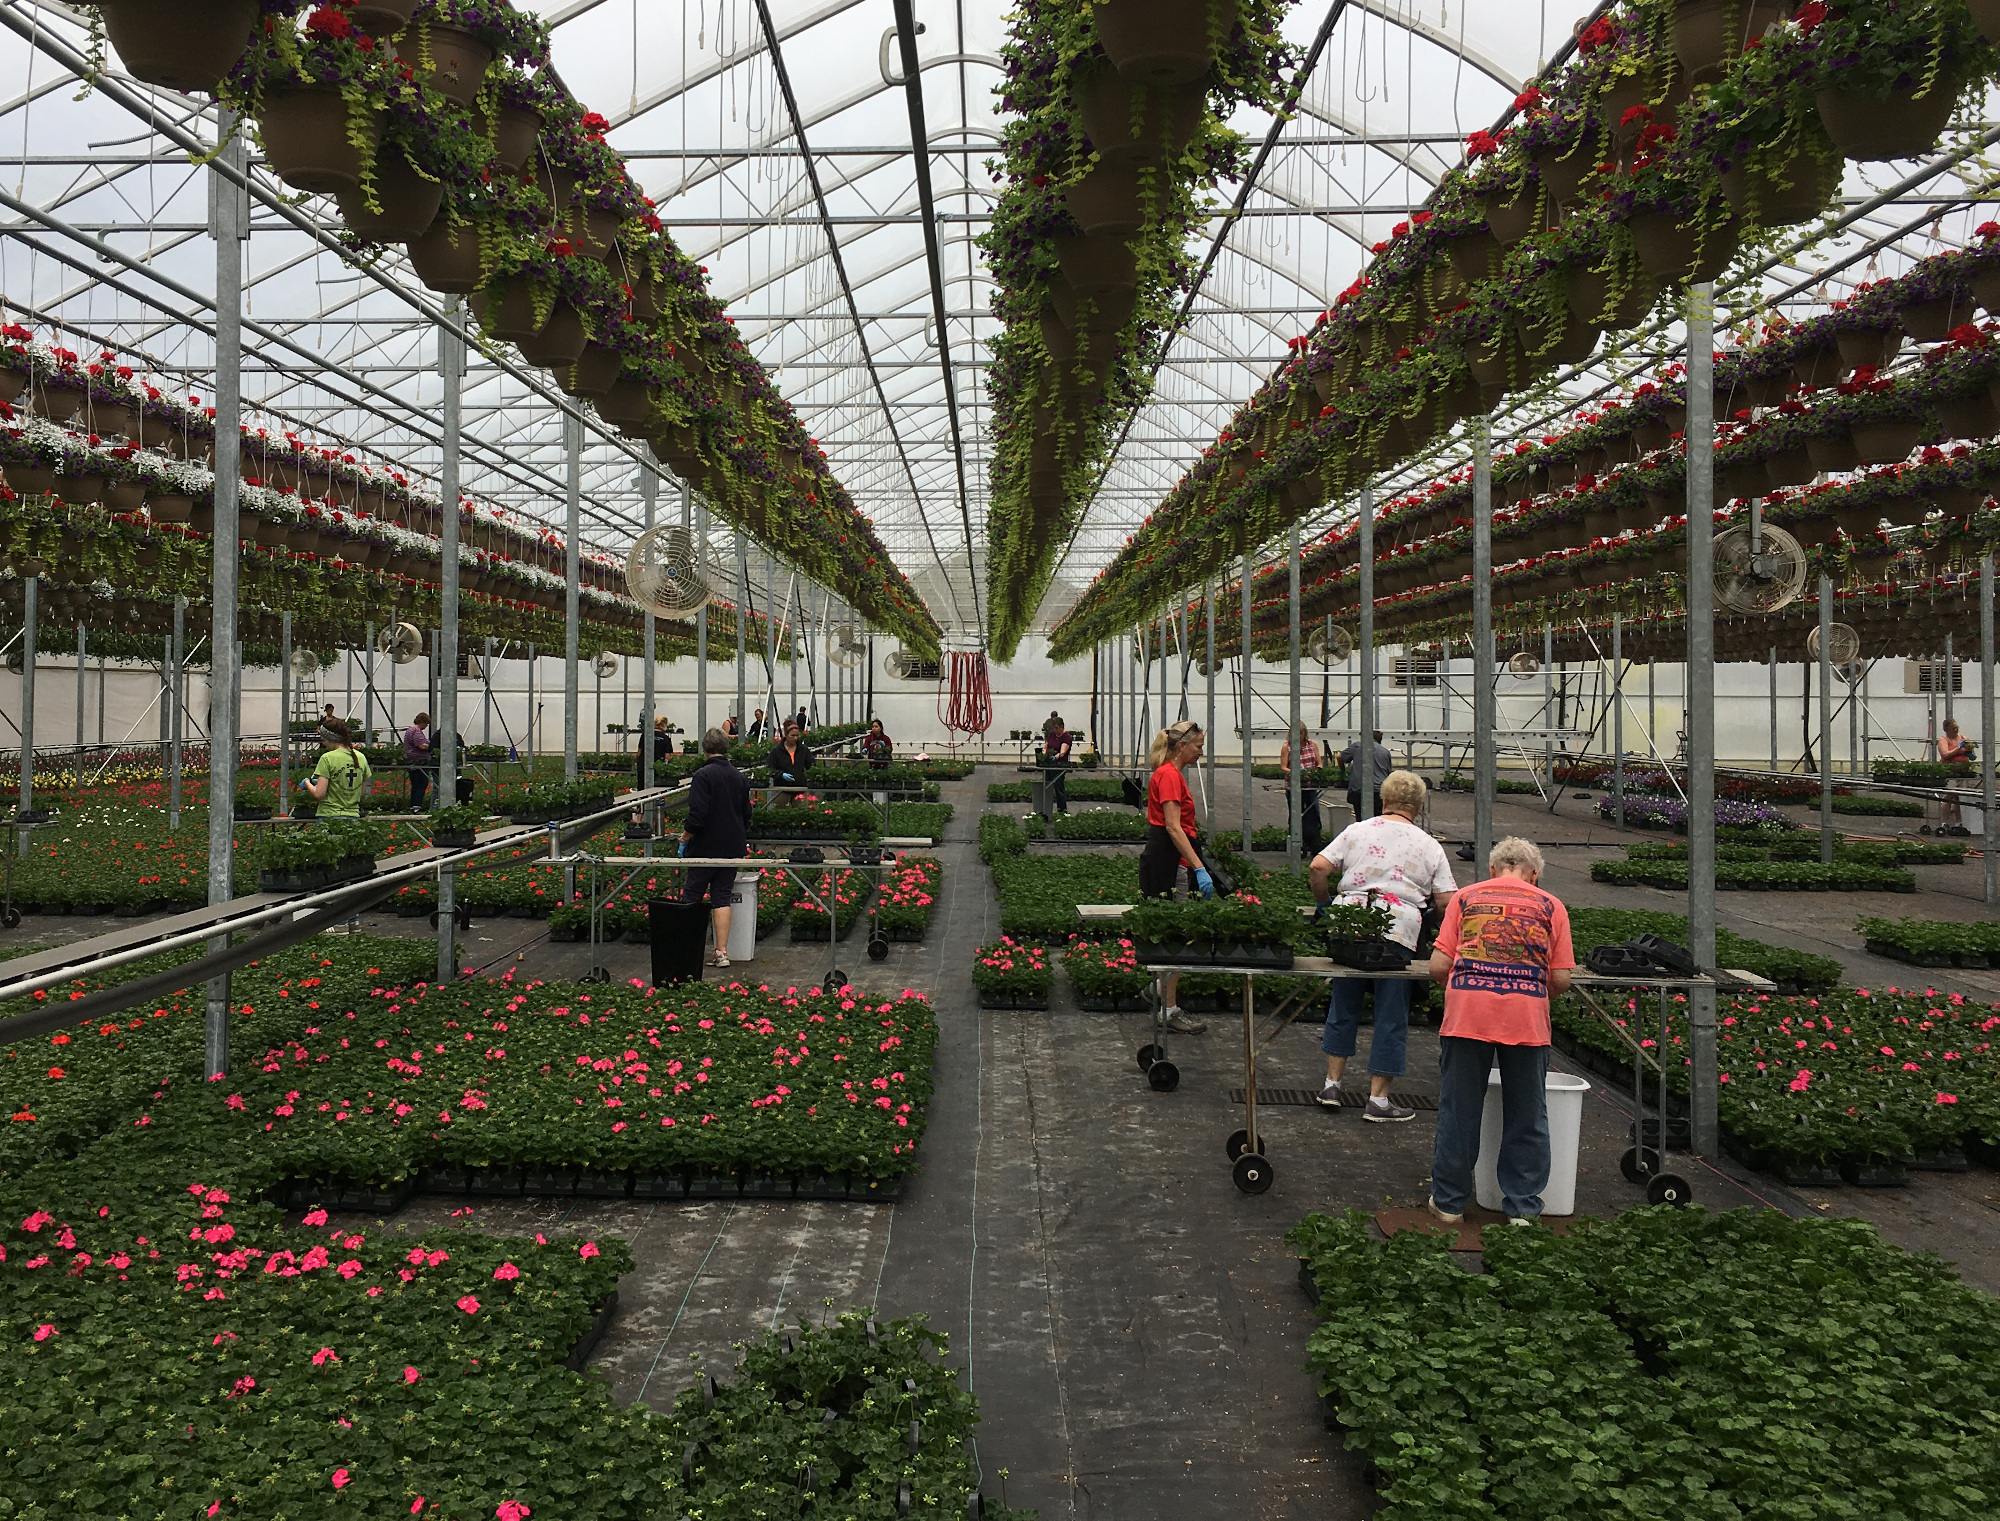 Greenhouse workers